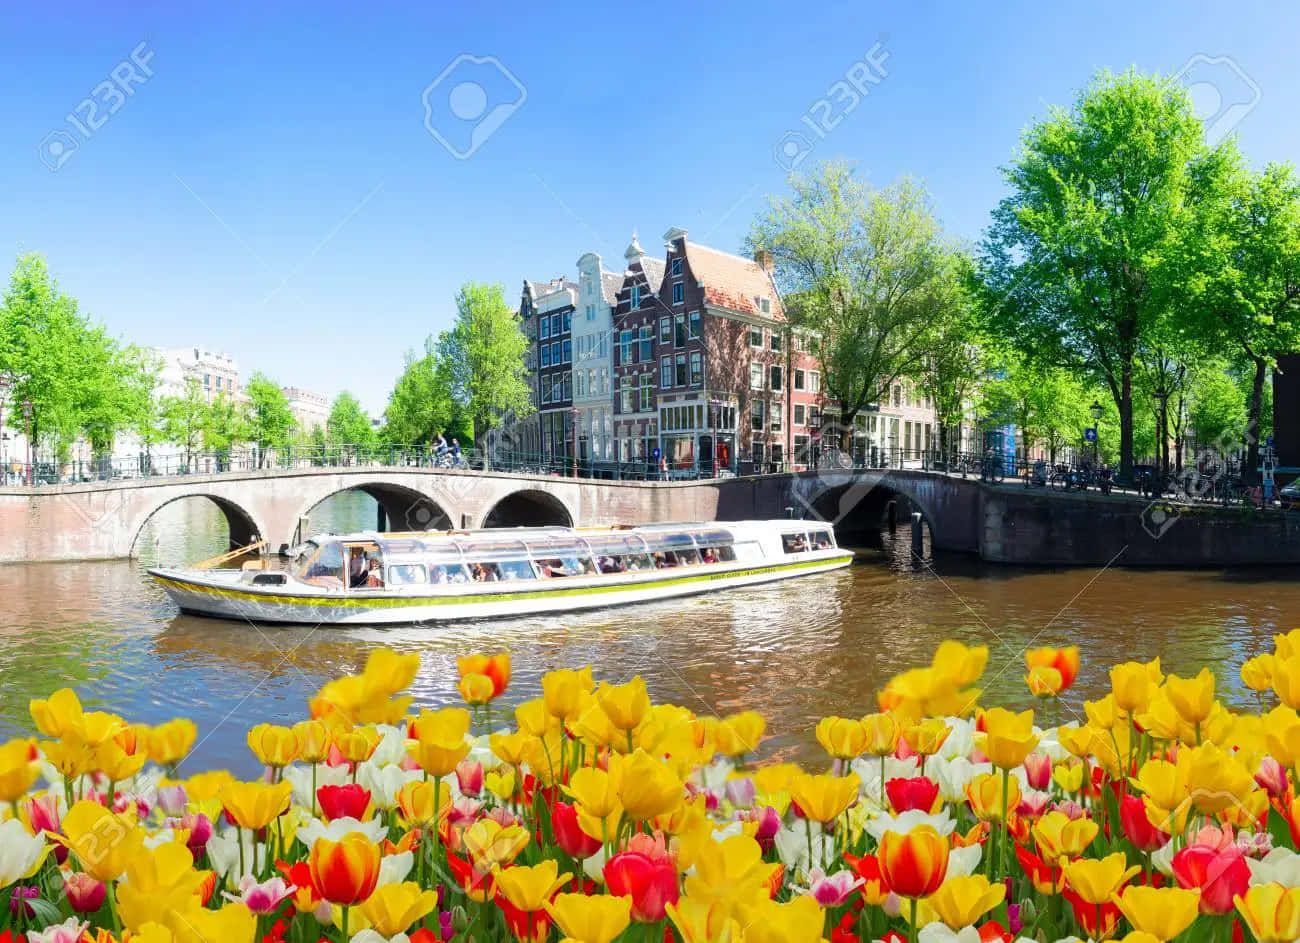 Enjoy the beauty of Amsterdam in the spring. Wallpaper